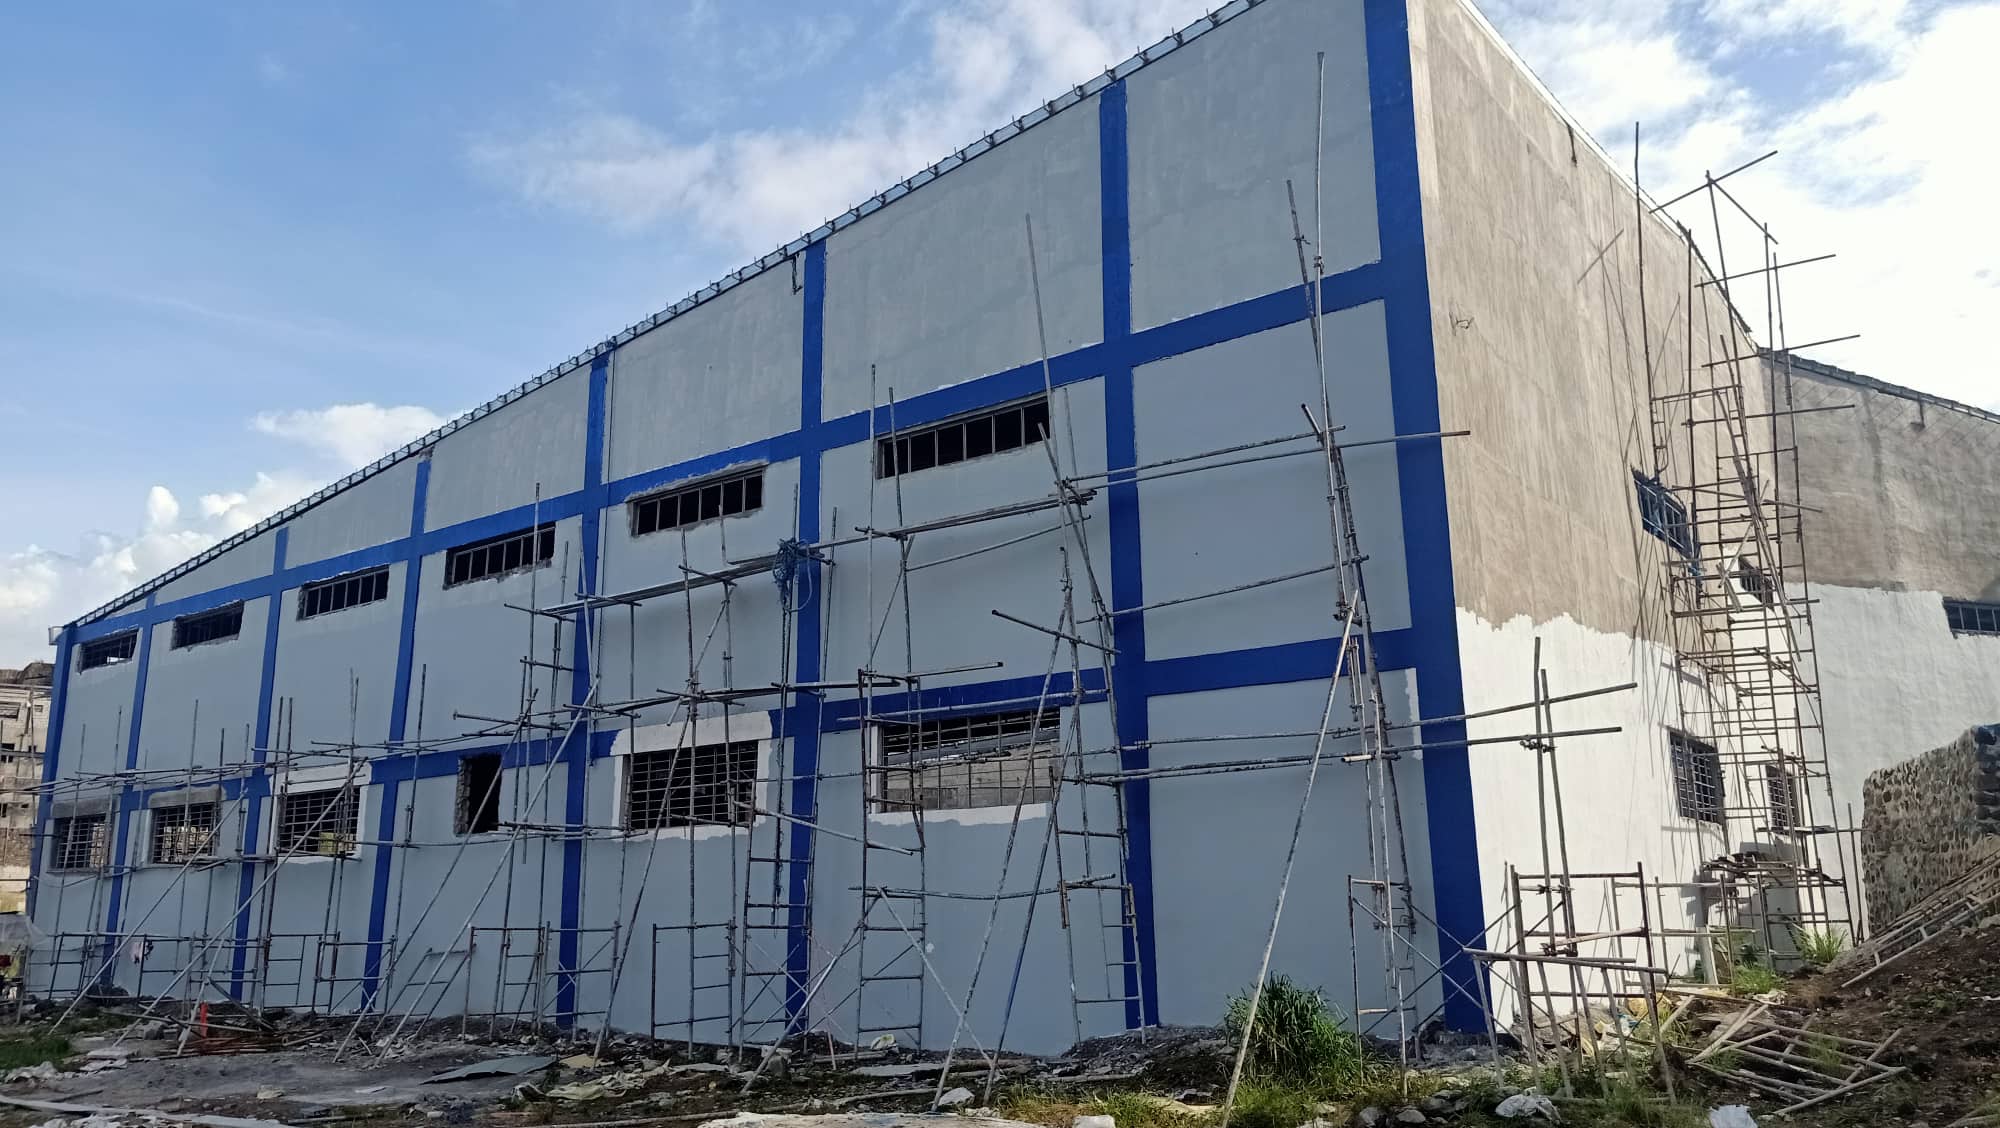 4,188.25sqm Warehouse Building for Lease in Southwoods Industrial Park